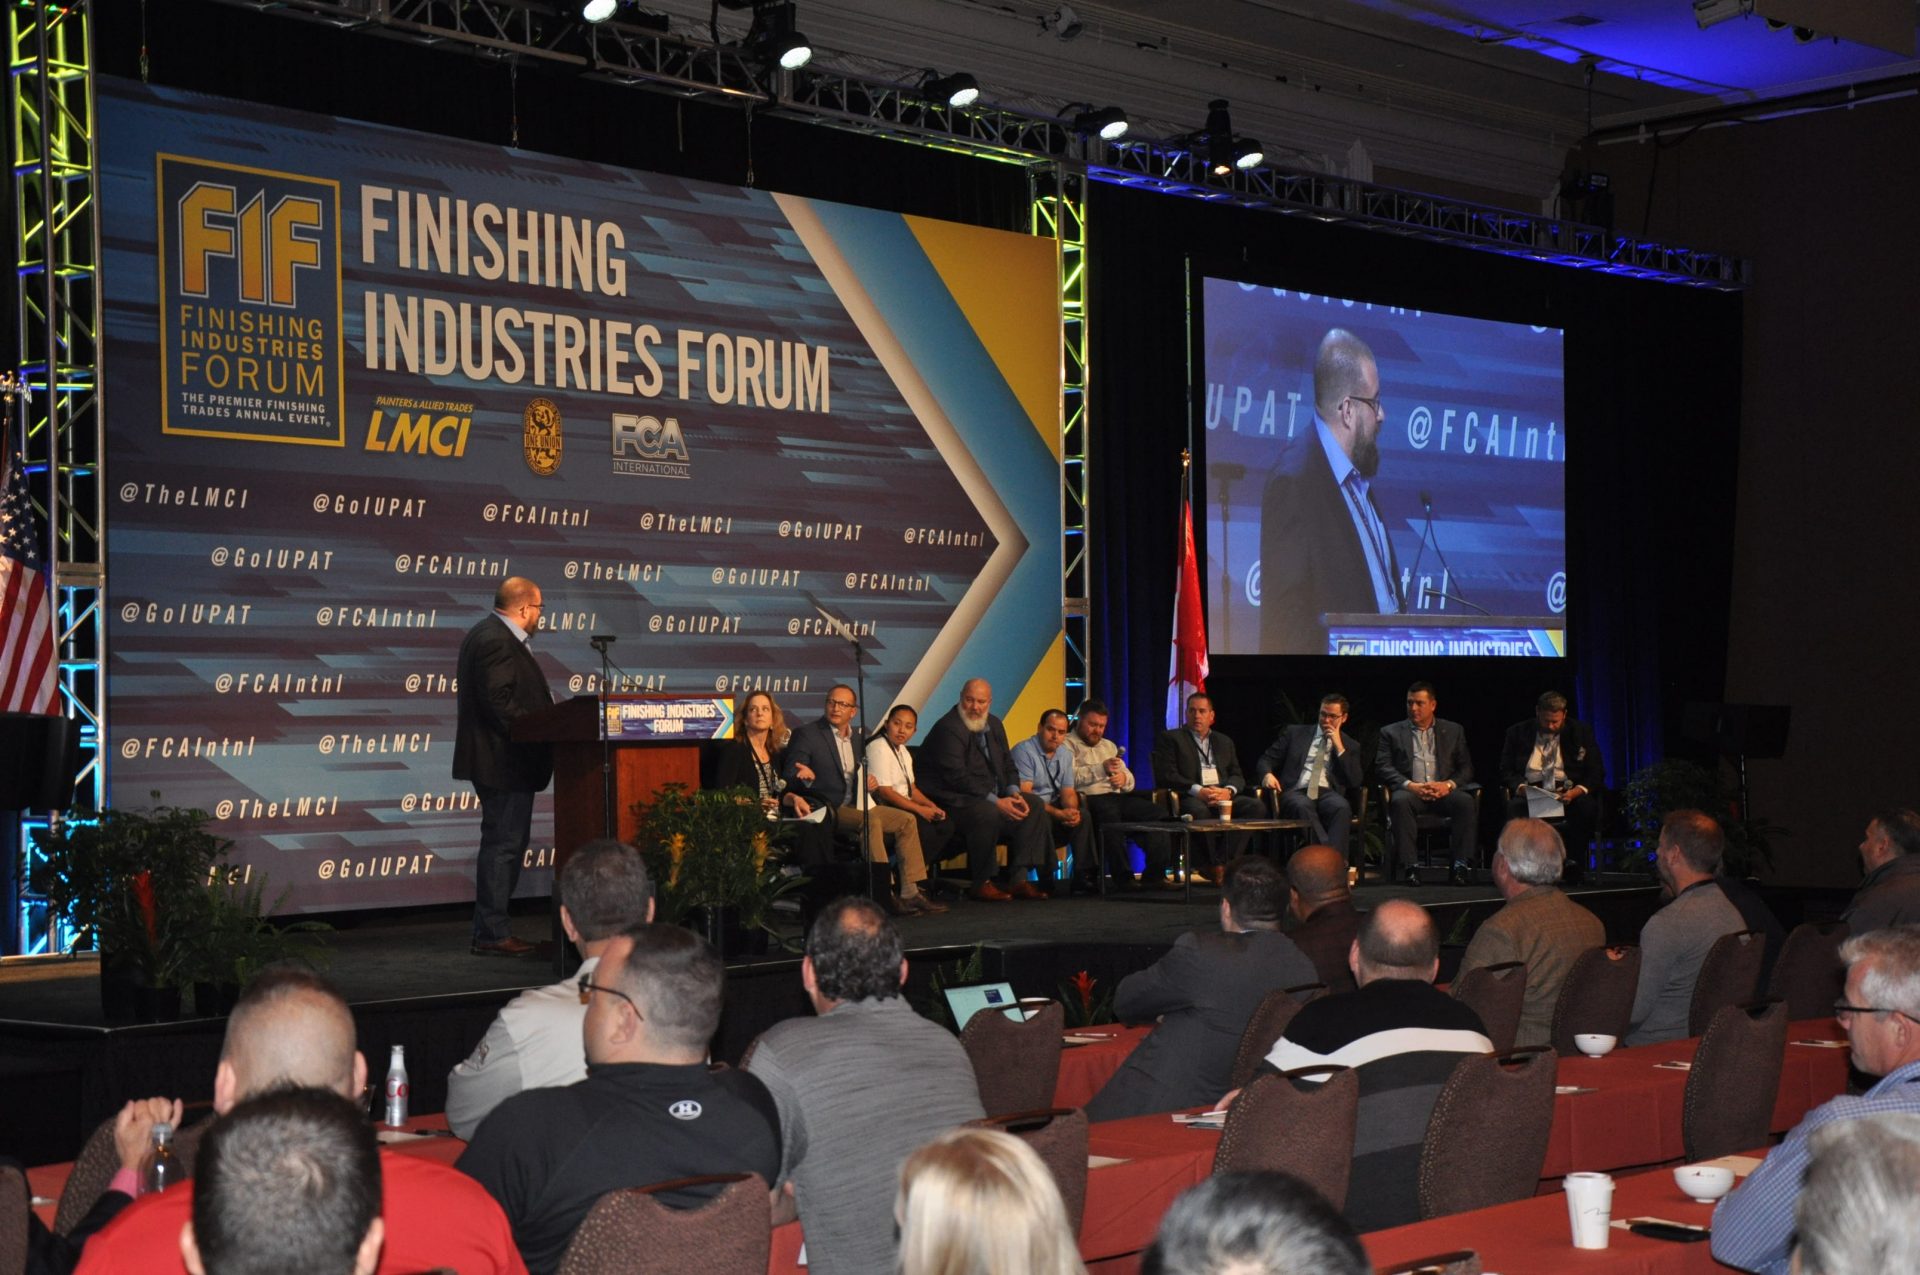 Image from the Gallery: Finishing Industries Forum – Las Vegas, NV